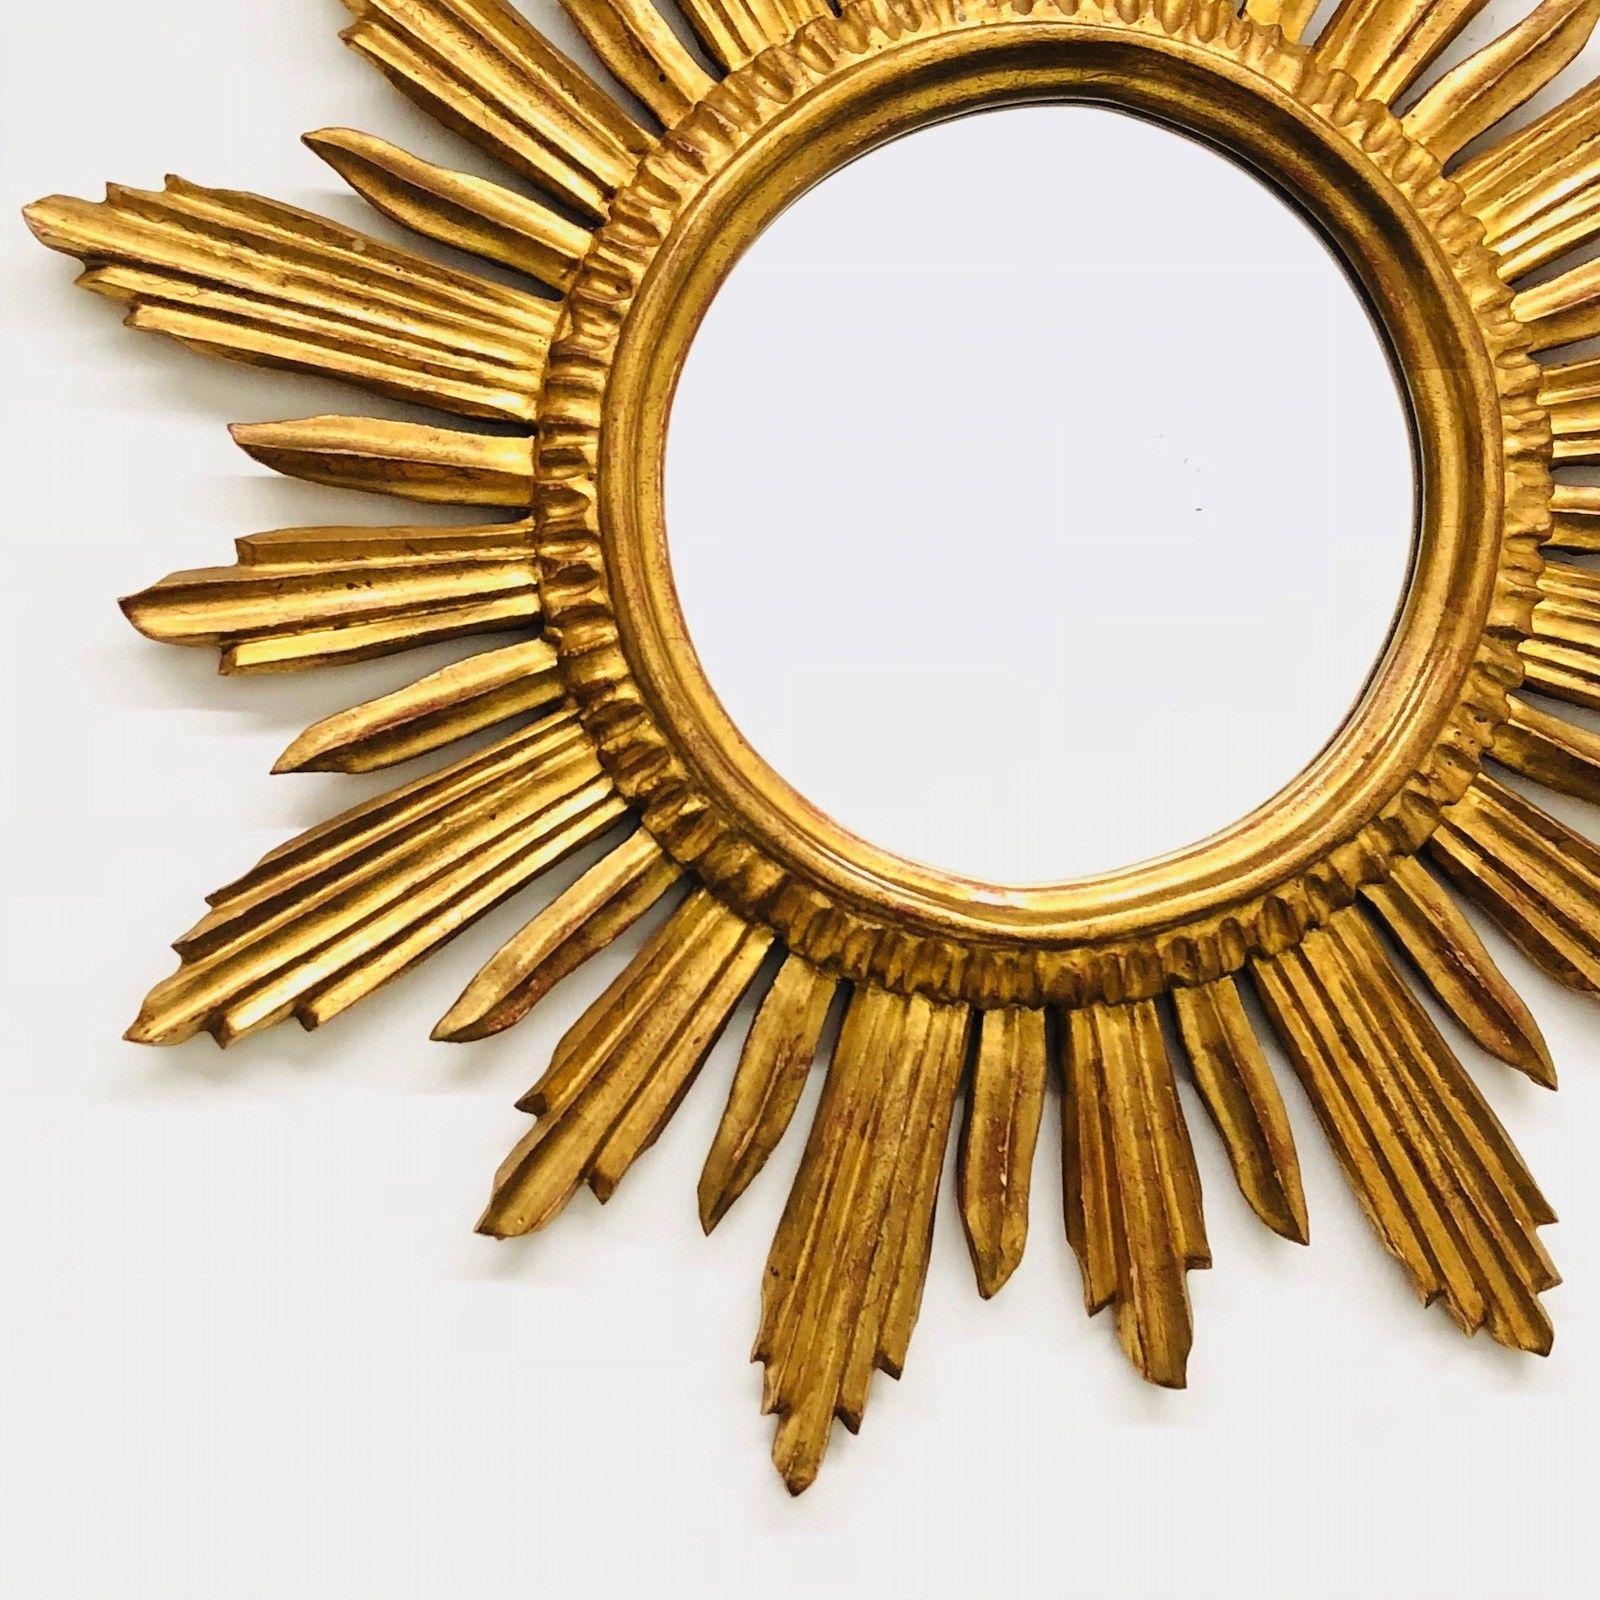 A gorgeous starburst mirror. Made of gilded wood. No chips, no cracks, no repairs. It measures approximate 22 7/8